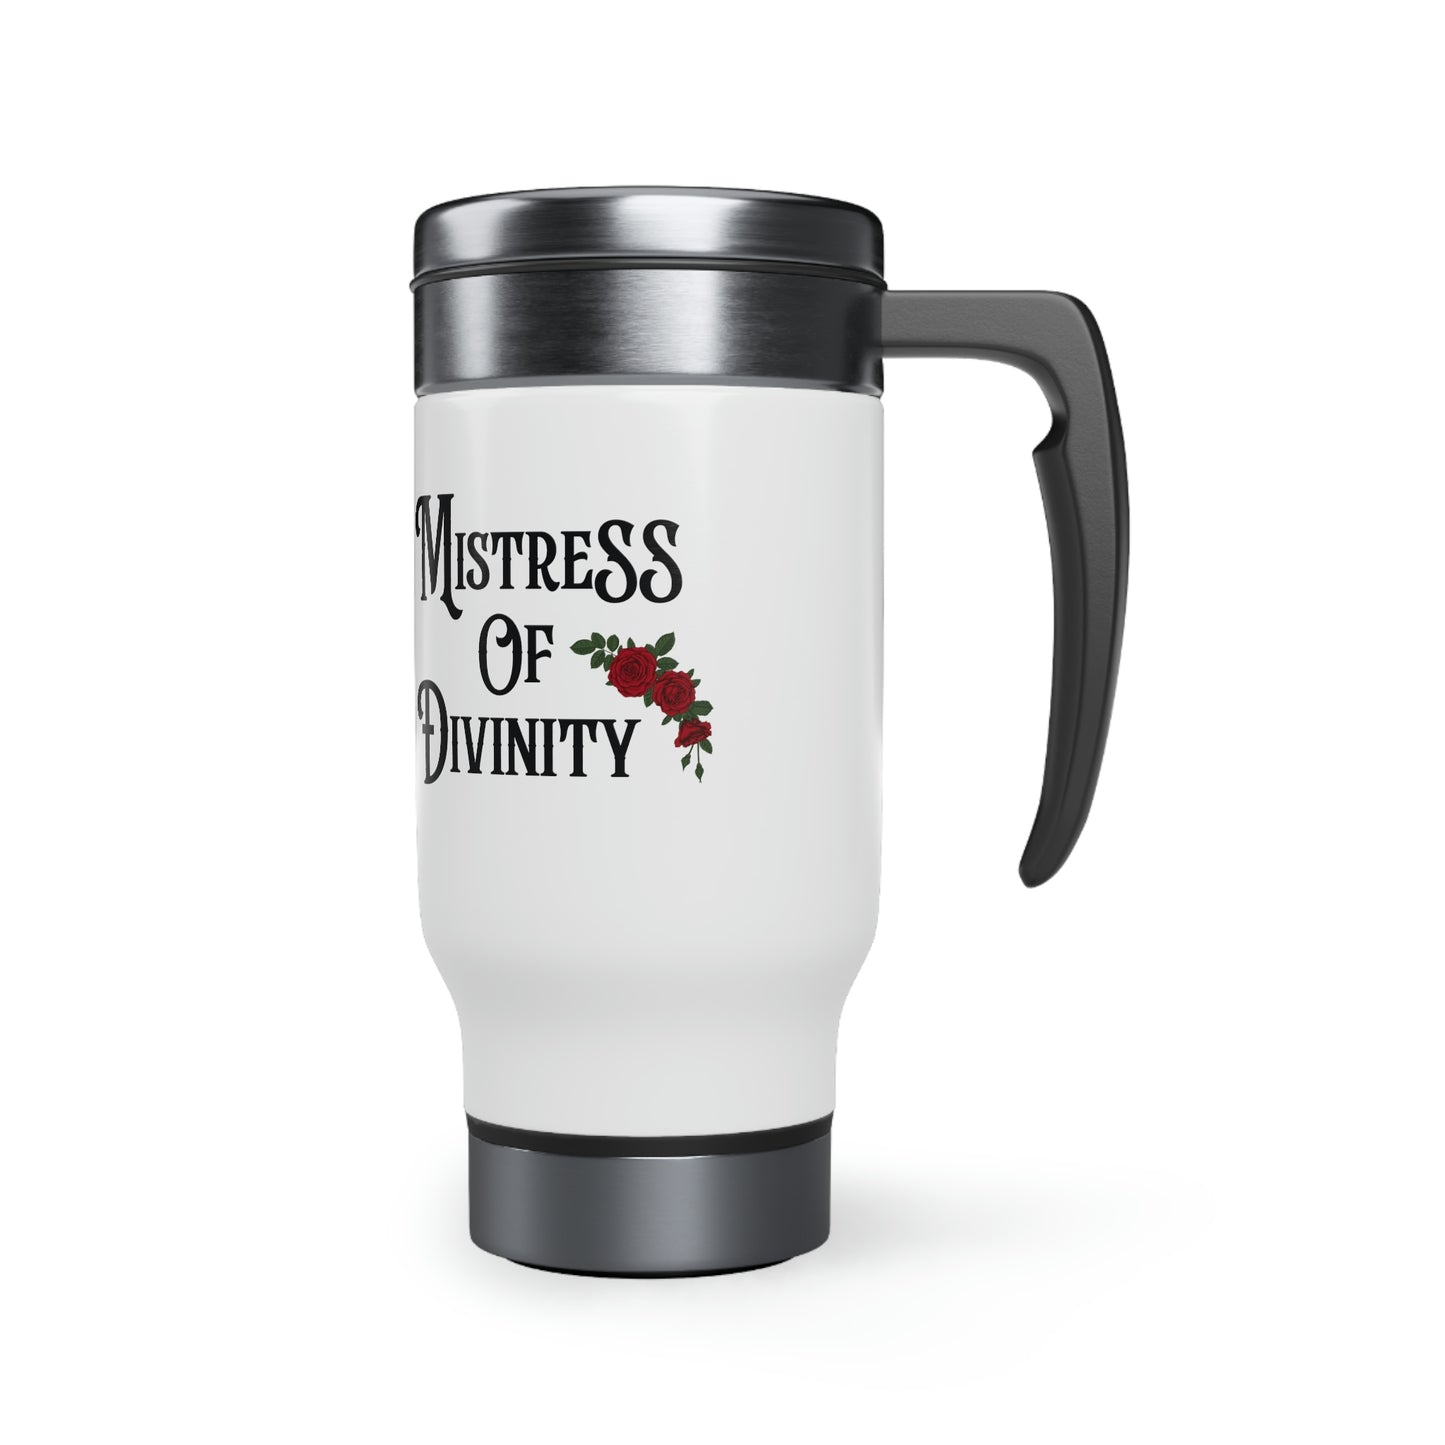 Mistress of Divinity Stainless Steel Travel Mug with Handle, 14oz Pastor Cup Pastor Gift for Minister Gift for Seminarian Graduation